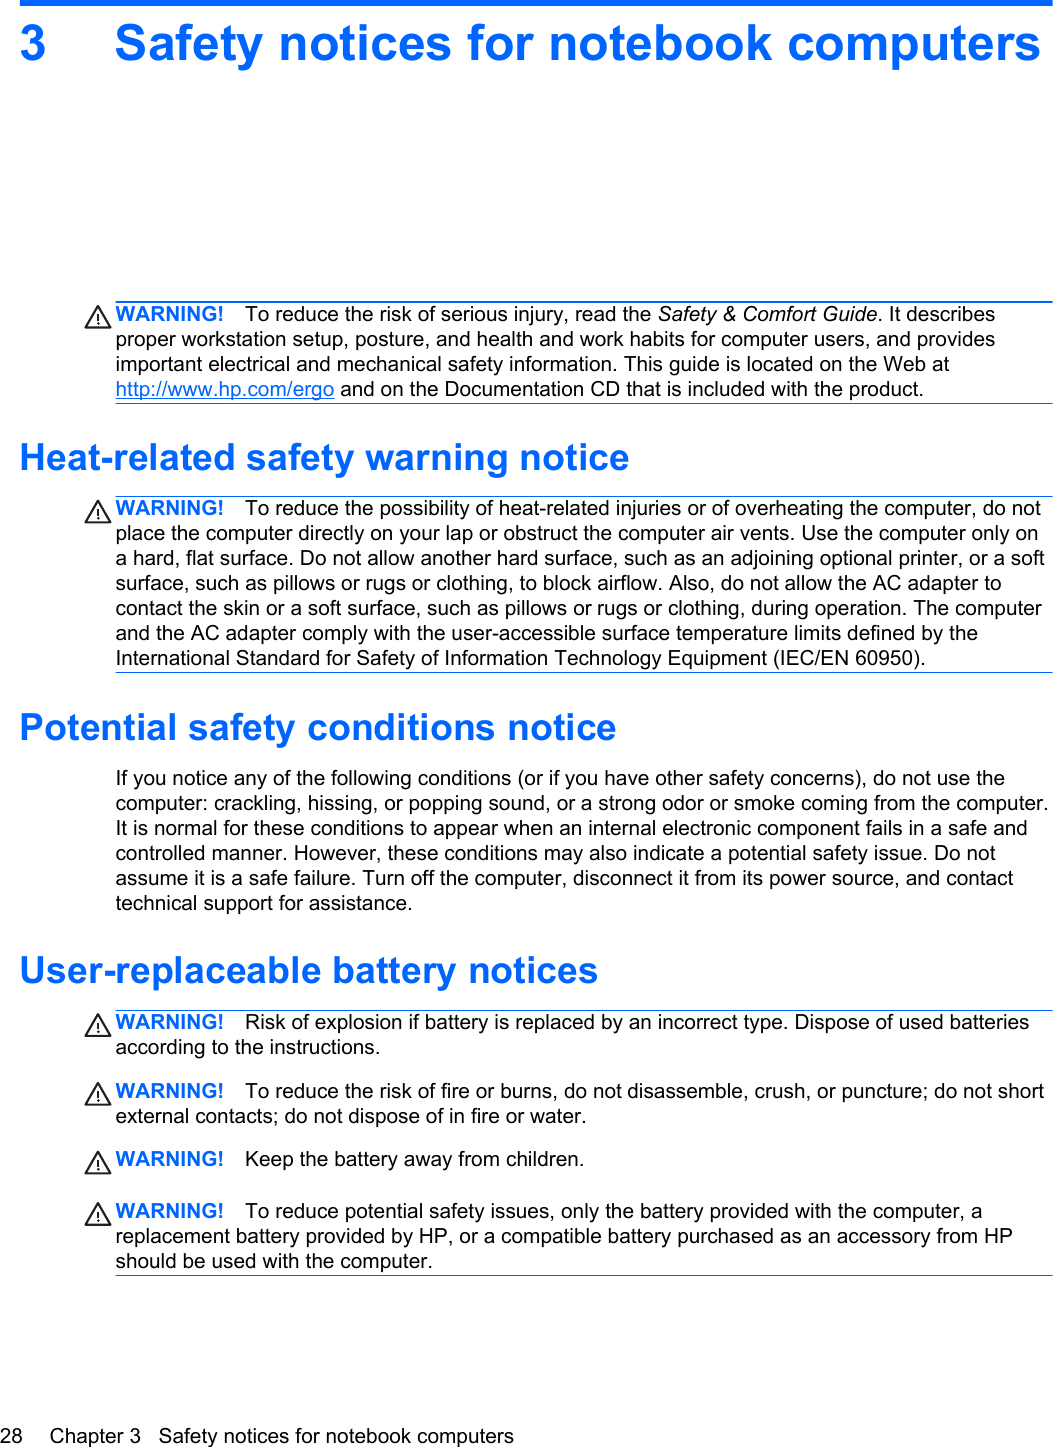 3 Safety notices for notebook computersWARNING! To reduce the risk of serious injury, read the Safety &amp; Comfort Guide. It describesproper workstation setup, posture, and health and work habits for computer users, and providesimportant electrical and mechanical safety information. This guide is located on the Web athttp://www.hp.com/ergo and on the Documentation CD that is included with the product.Heat-related safety warning noticeWARNING! To reduce the possibility of heat-related injuries or of overheating the computer, do notplace the computer directly on your lap or obstruct the computer air vents. Use the computer only ona hard, flat surface. Do not allow another hard surface, such as an adjoining optional printer, or a softsurface, such as pillows or rugs or clothing, to block airflow. Also, do not allow the AC adapter tocontact the skin or a soft surface, such as pillows or rugs or clothing, during operation. The computerand the AC adapter comply with the user-accessible surface temperature limits defined by theInternational Standard for Safety of Information Technology Equipment (IEC/EN 60950).Potential safety conditions noticeIf you notice any of the following conditions (or if you have other safety concerns), do not use thecomputer: crackling, hissing, or popping sound, or a strong odor or smoke coming from the computer.It is normal for these conditions to appear when an internal electronic component fails in a safe andcontrolled manner. However, these conditions may also indicate a potential safety issue. Do notassume it is a safe failure. Turn off the computer, disconnect it from its power source, and contacttechnical support for assistance.User-replaceable battery noticesWARNING! Risk of explosion if battery is replaced by an incorrect type. Dispose of used batteriesaccording to the instructions.WARNING! To reduce the risk of fire or burns, do not disassemble, crush, or puncture; do not shortexternal contacts; do not dispose of in fire or water.WARNING! Keep the battery away from children.WARNING! To reduce potential safety issues, only the battery provided with the computer, areplacement battery provided by HP, or a compatible battery purchased as an accessory from HPshould be used with the computer.28 Chapter 3   Safety notices for notebook computers